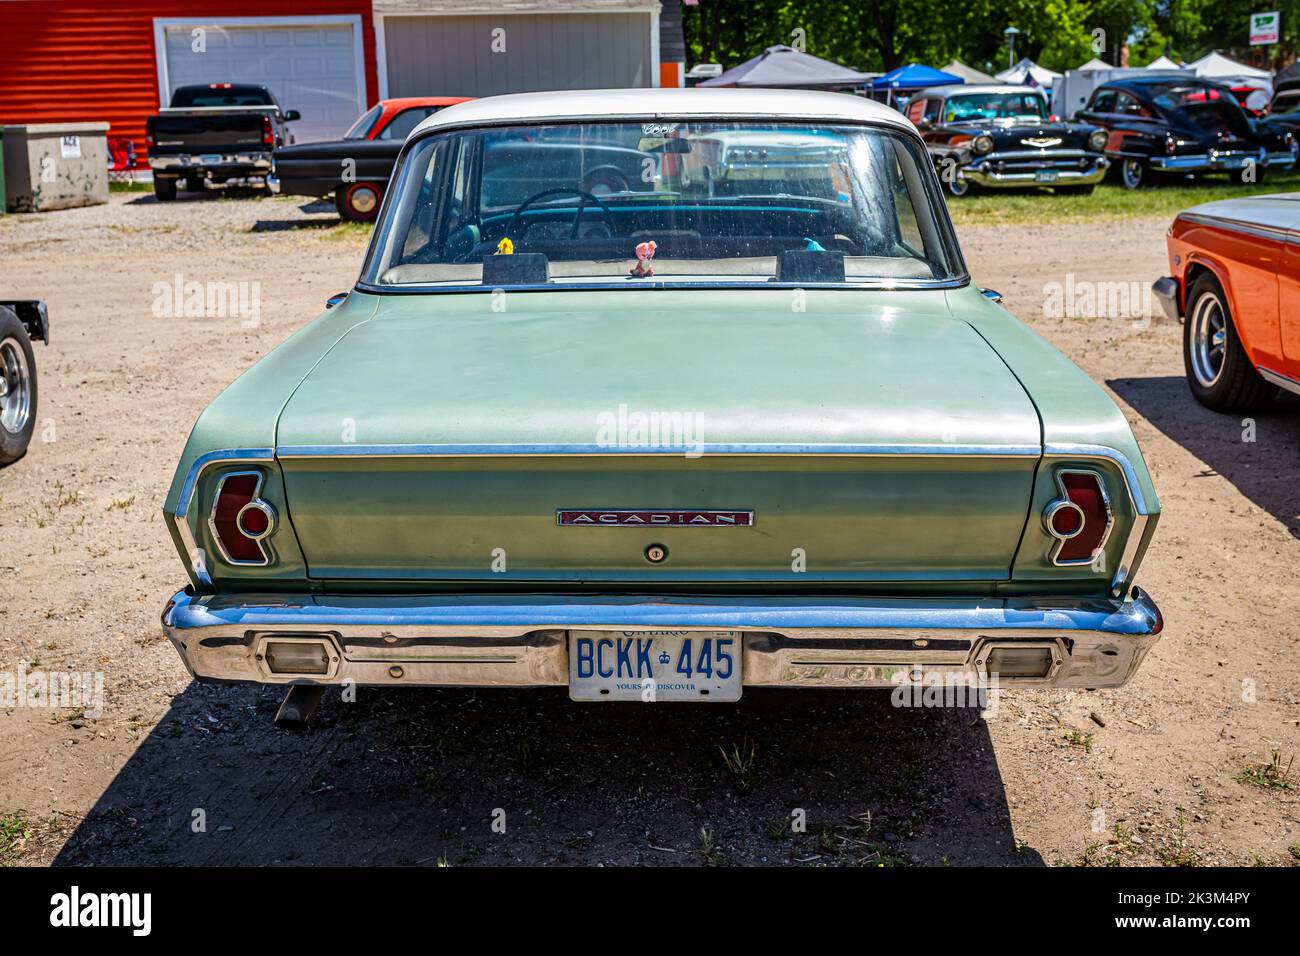 Falcon Heights, MN - June 18, 2022: High perspective rear view of a 1963 Acadian Invader 4 Door Sedan at a local car show. Stock Photo